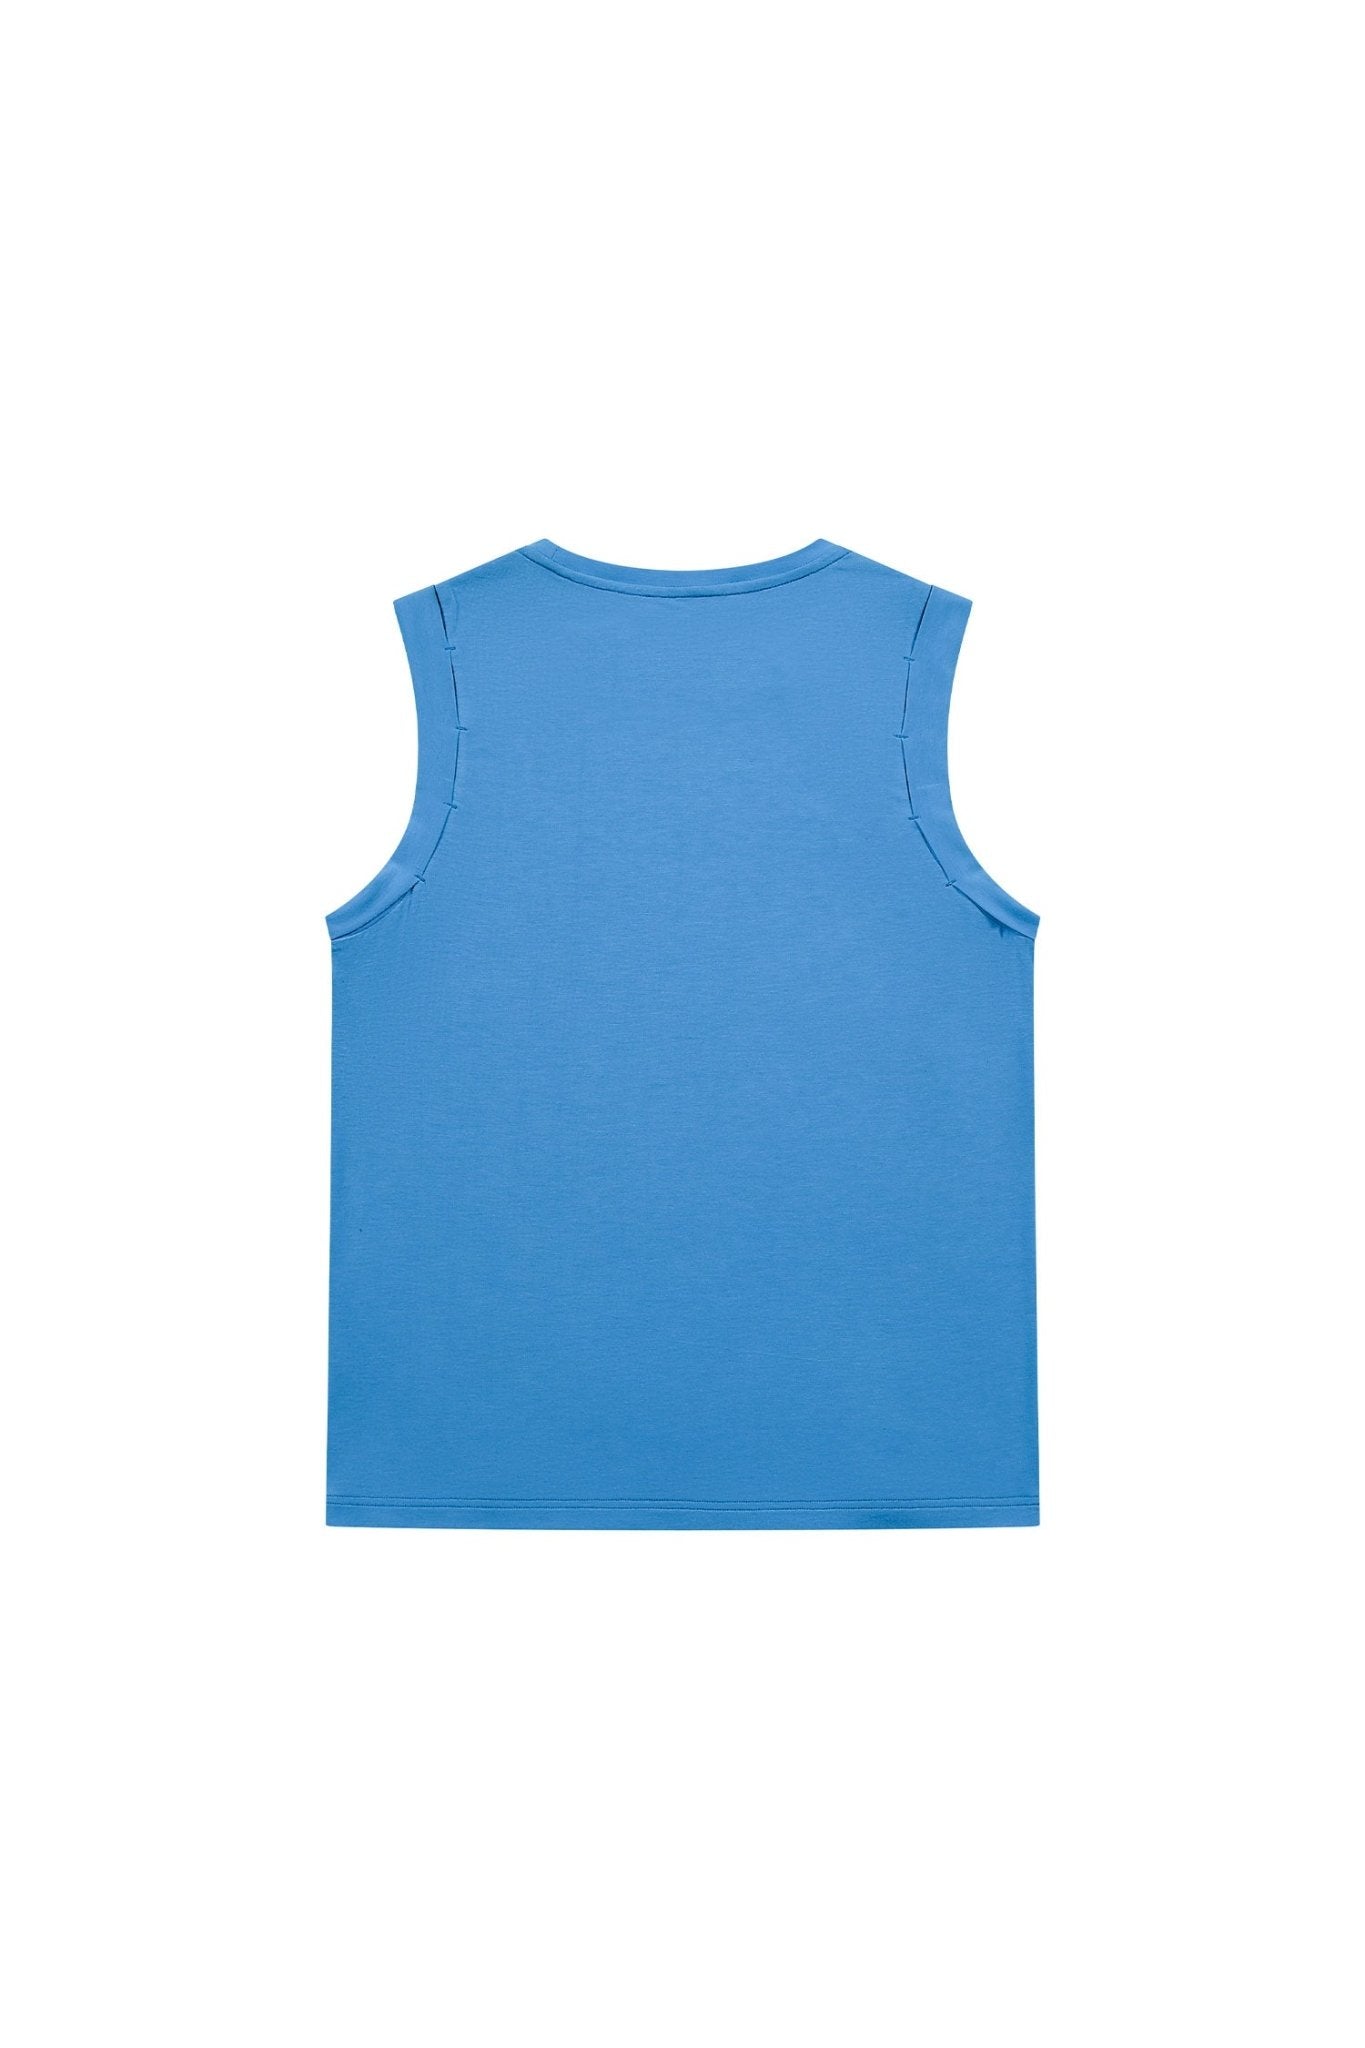 Wyton Muscle Tee - Magnlens